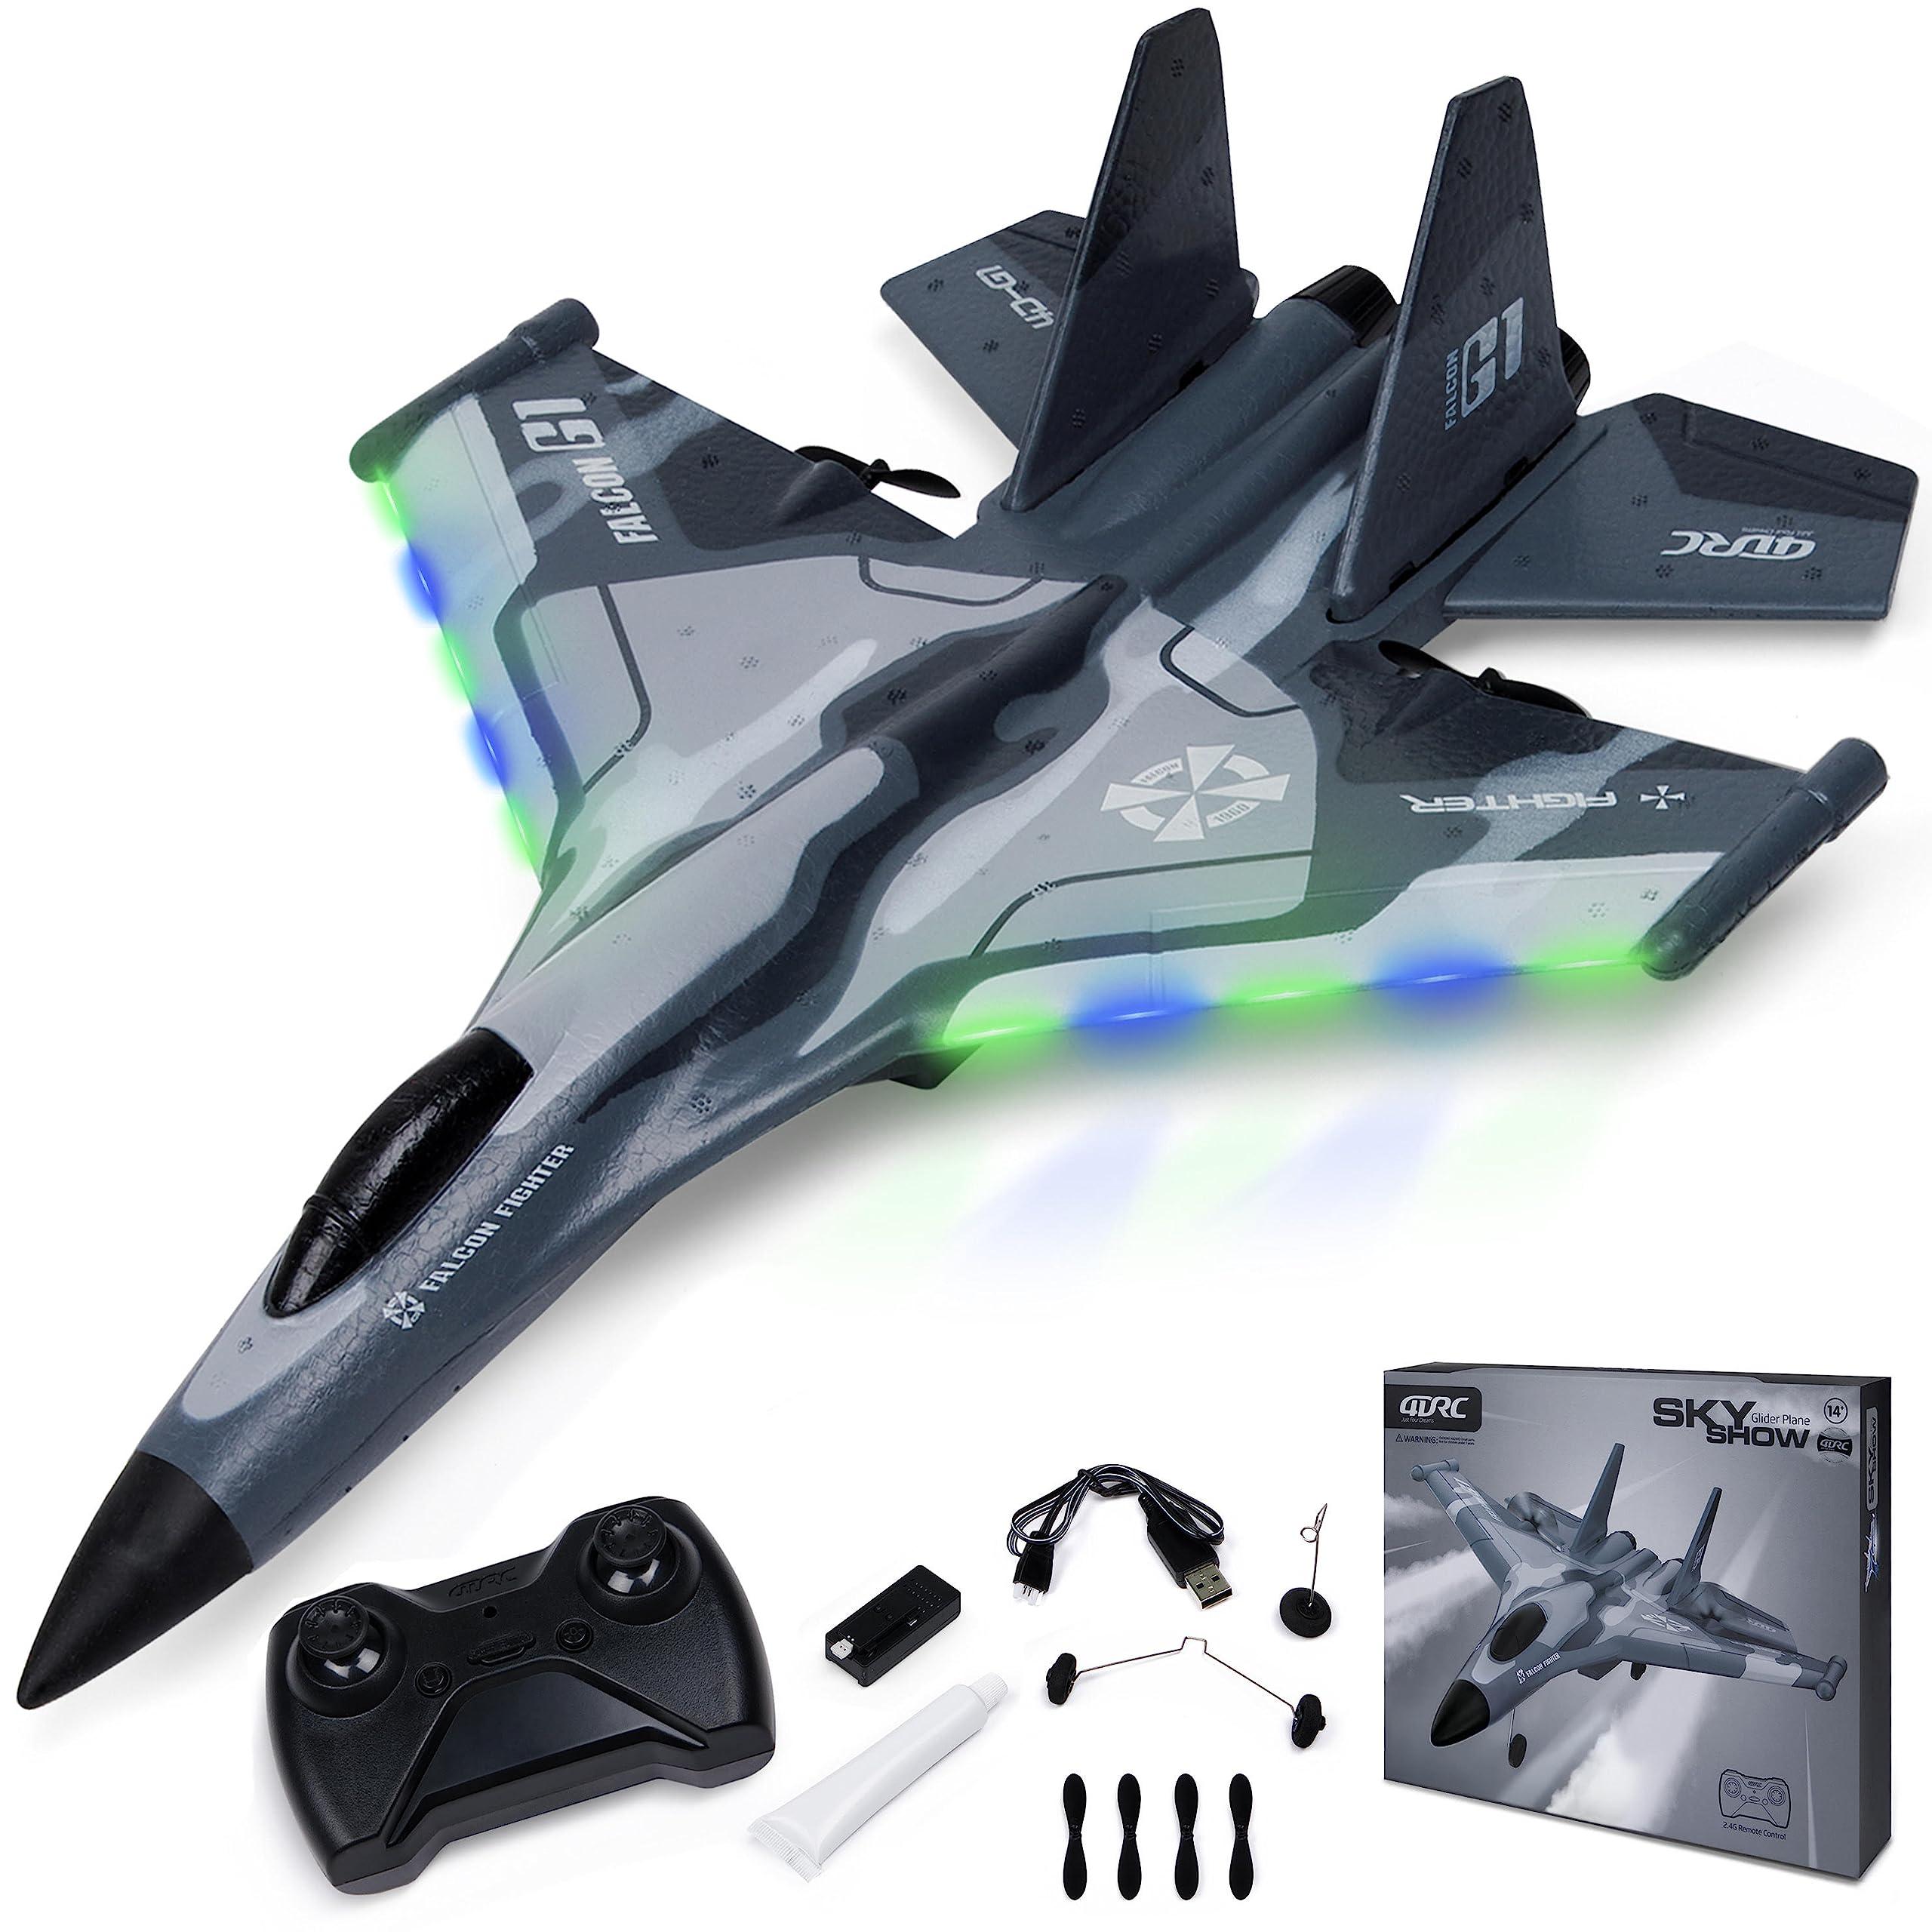 Rc Bomber Plane: Key Considerations for Choosing an RC Bomber Plane